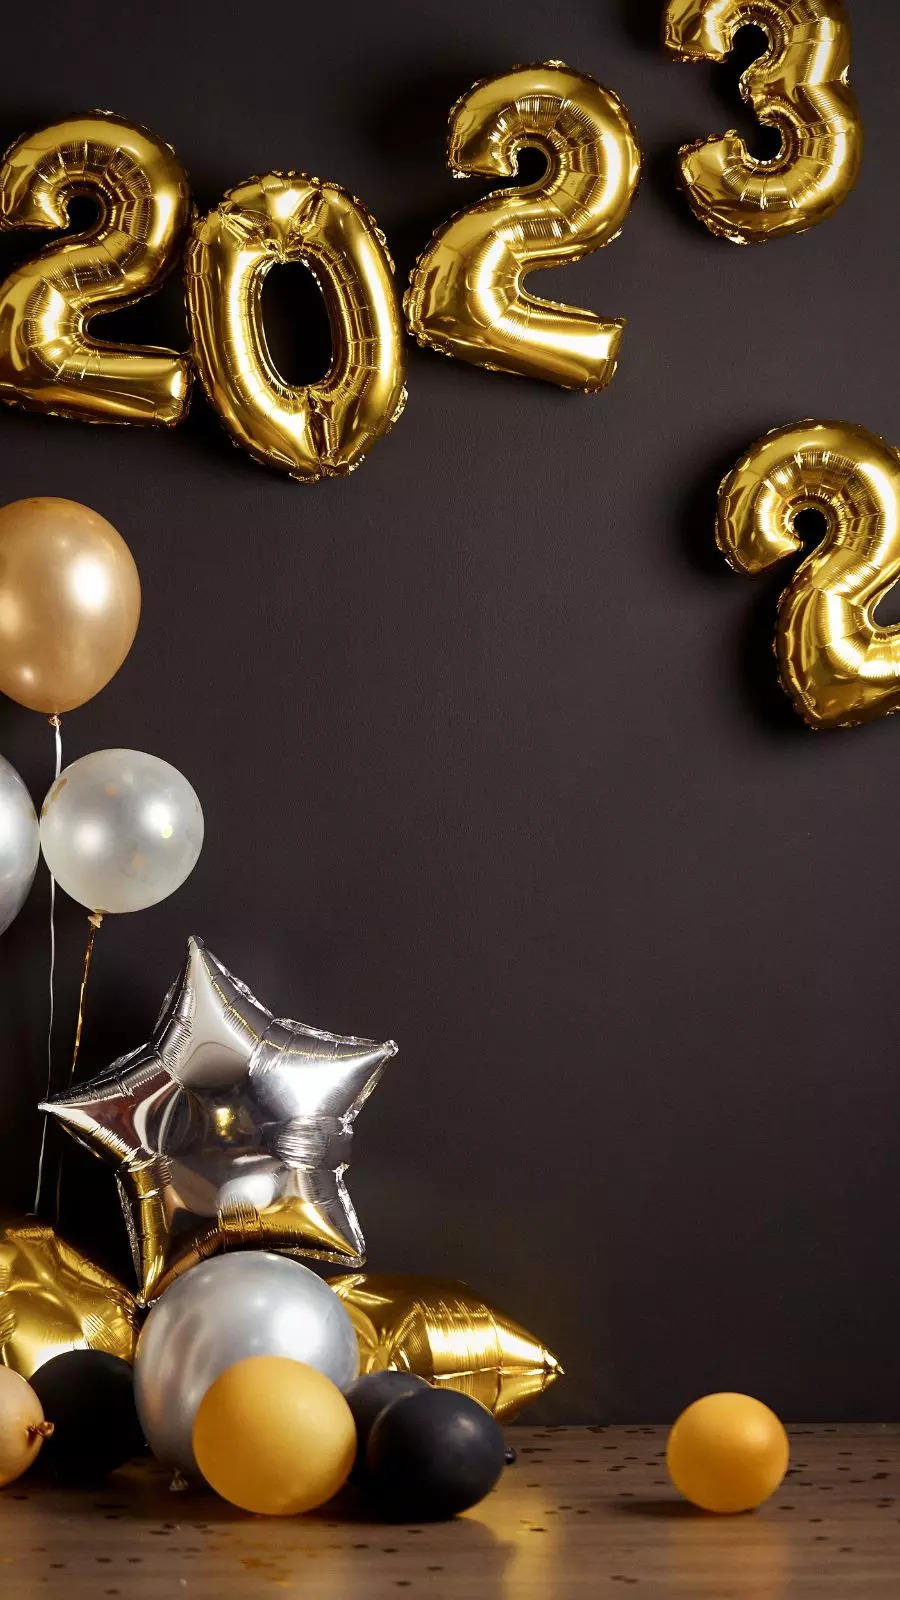 10 Best New Year’s Eve Decorations to Welcome 2023